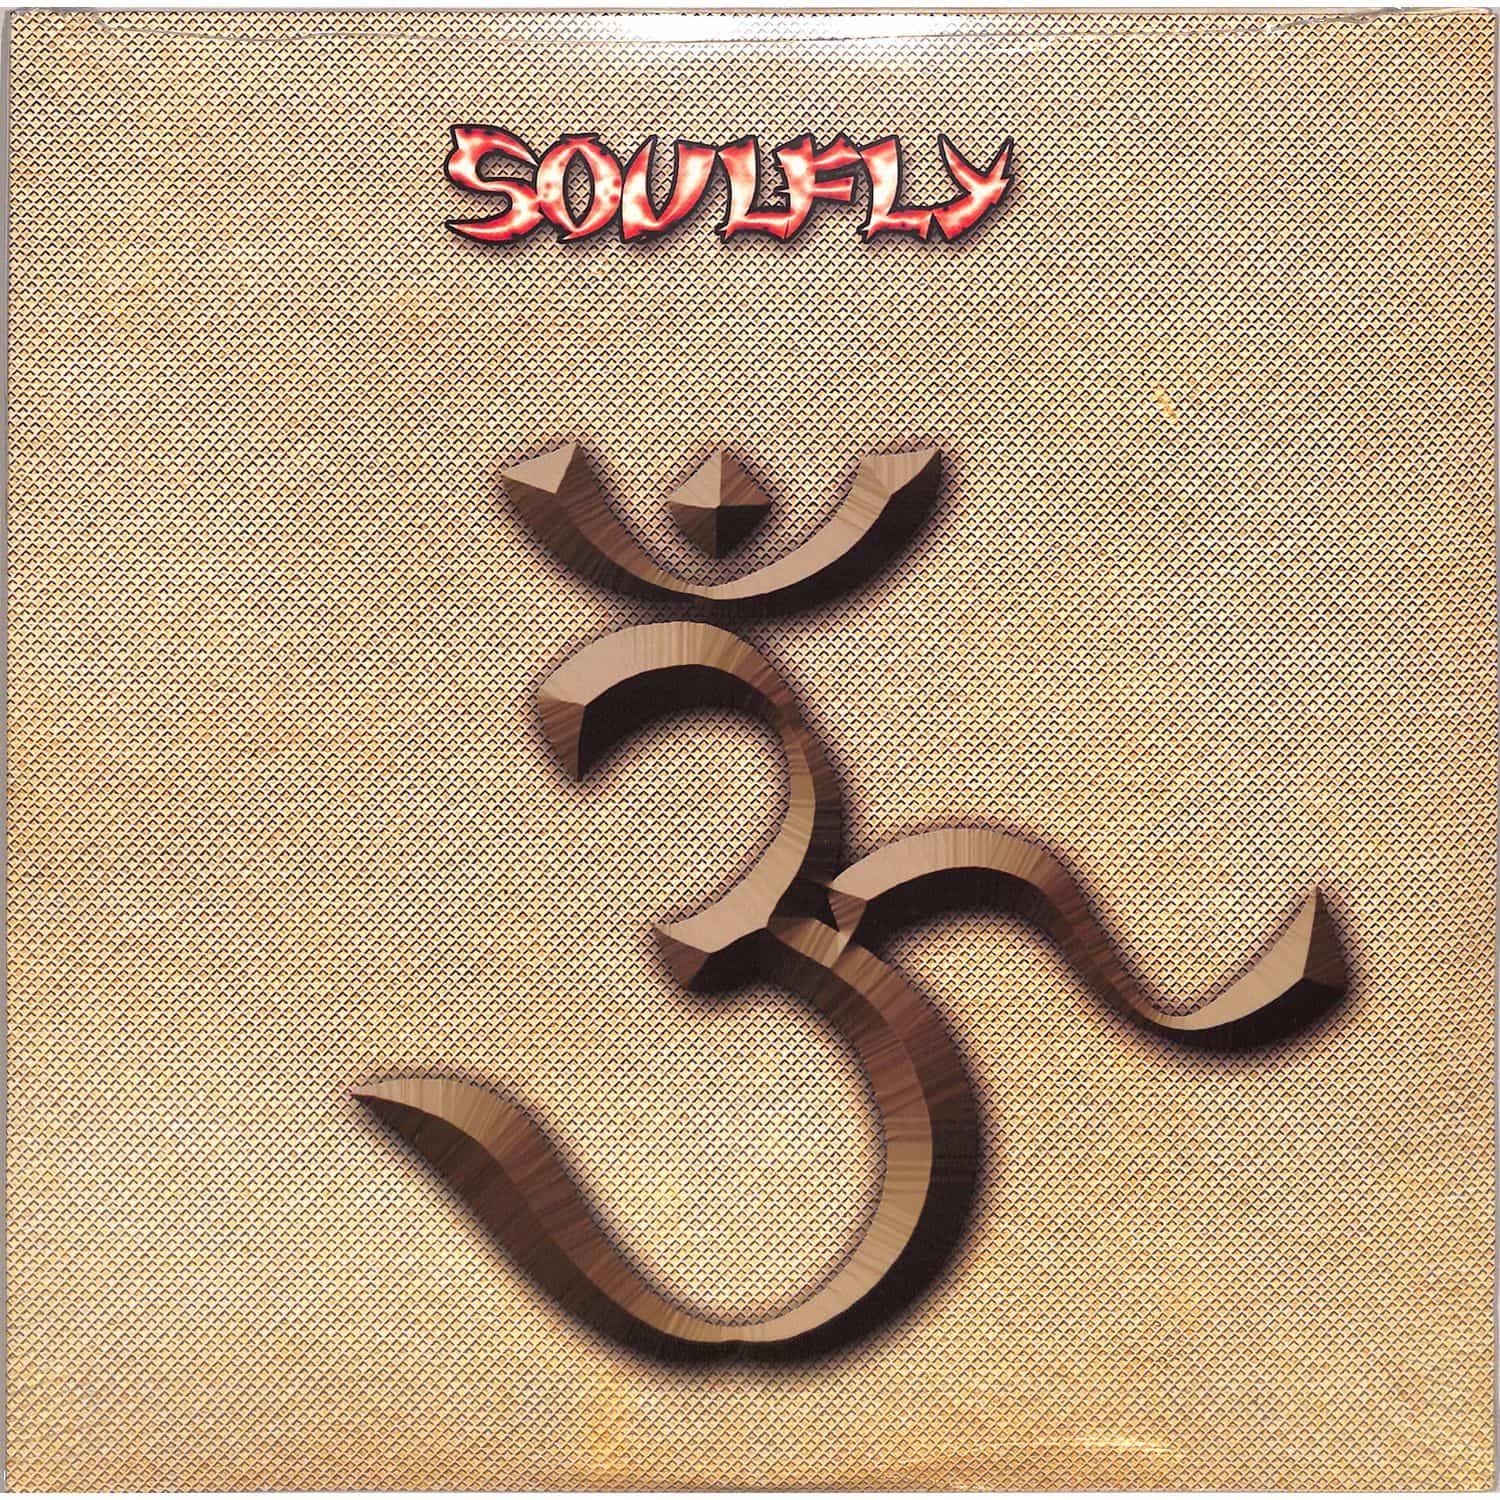 Soulfly - 3 